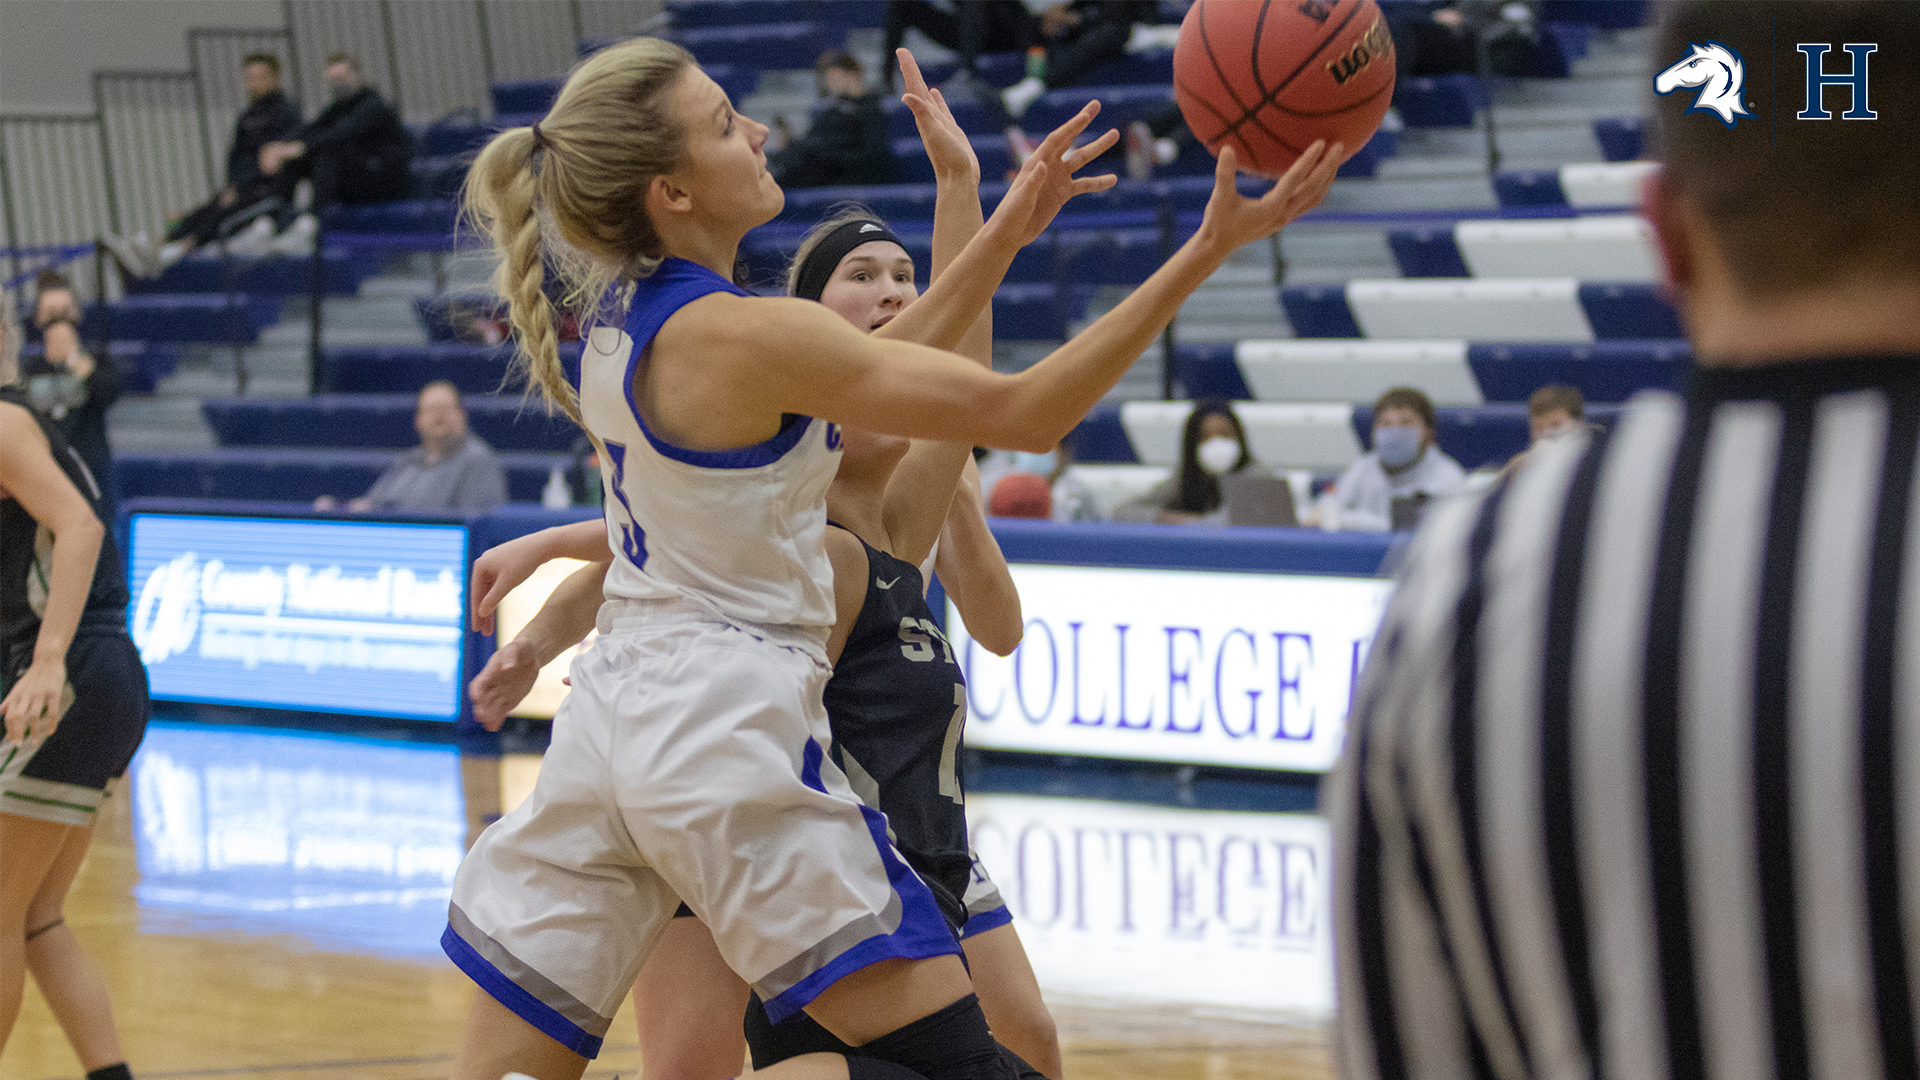 Historic performances power Charger women past Ohio Valley, 100-67